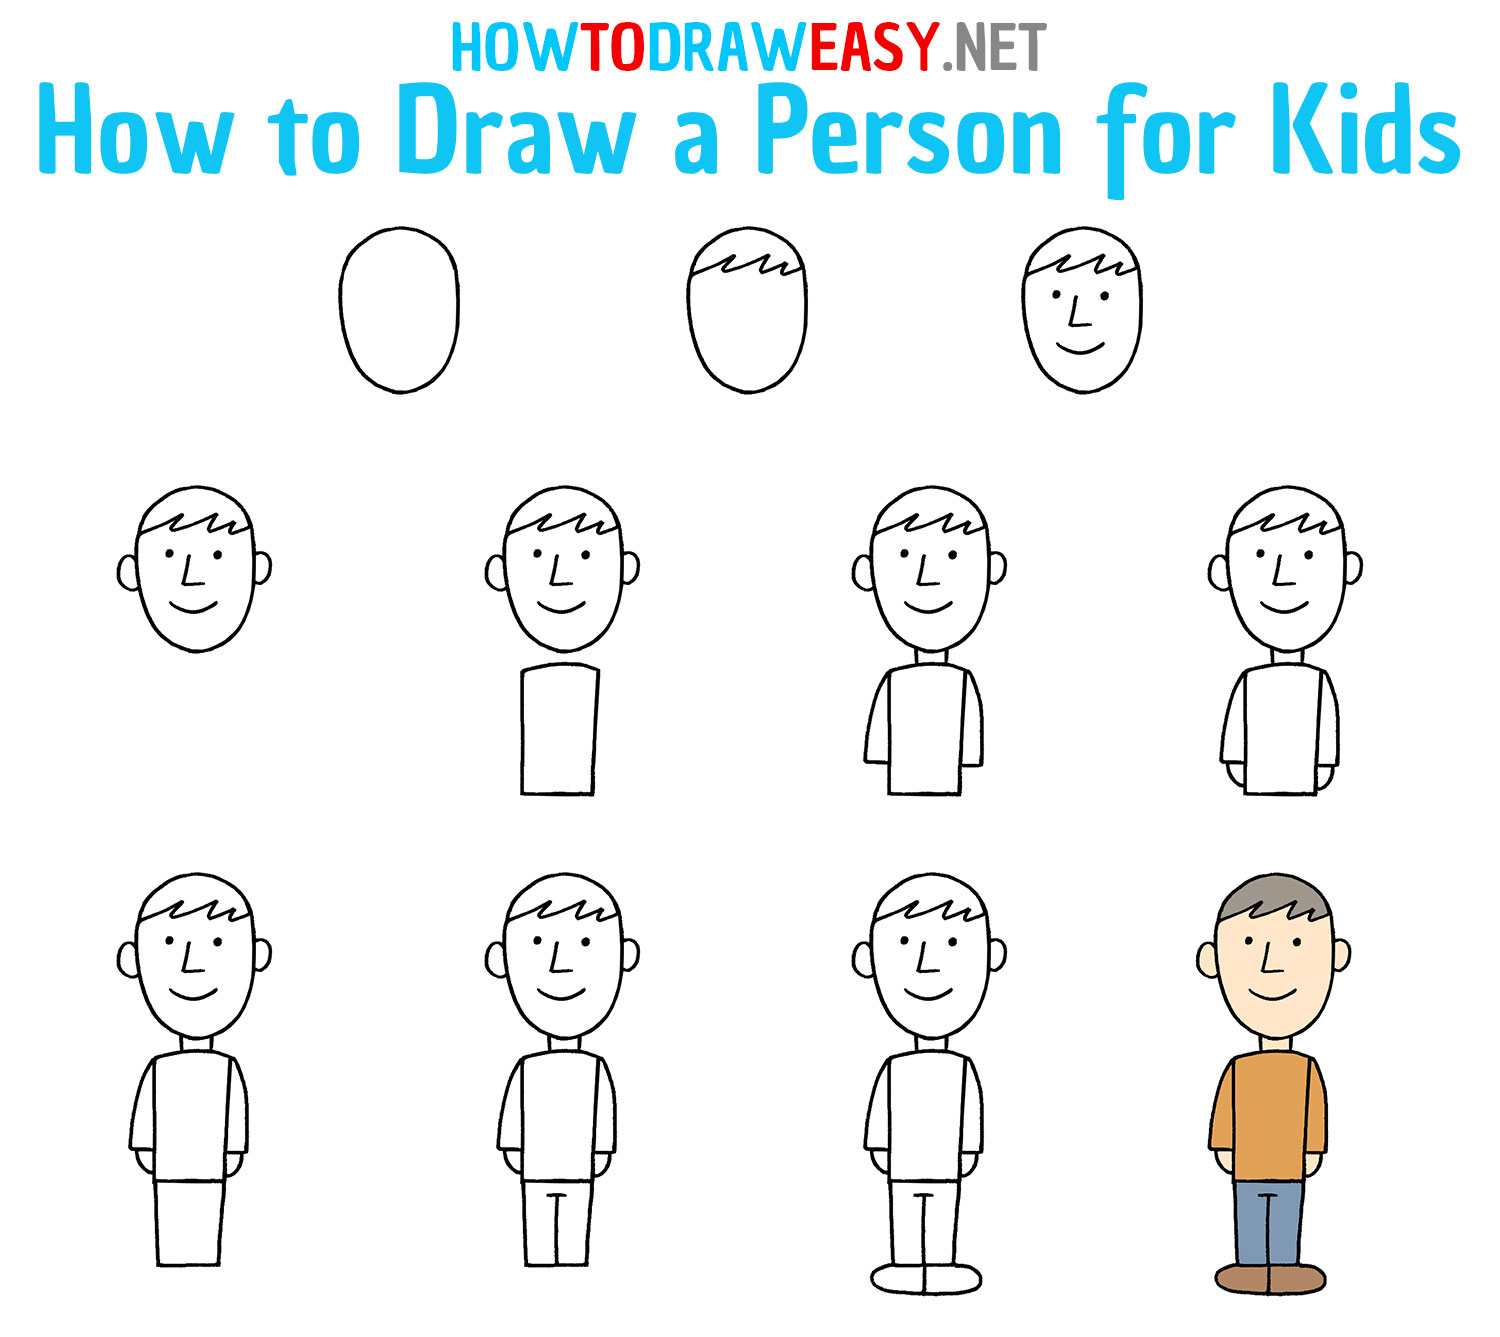 How to Draw a Person Step by Step